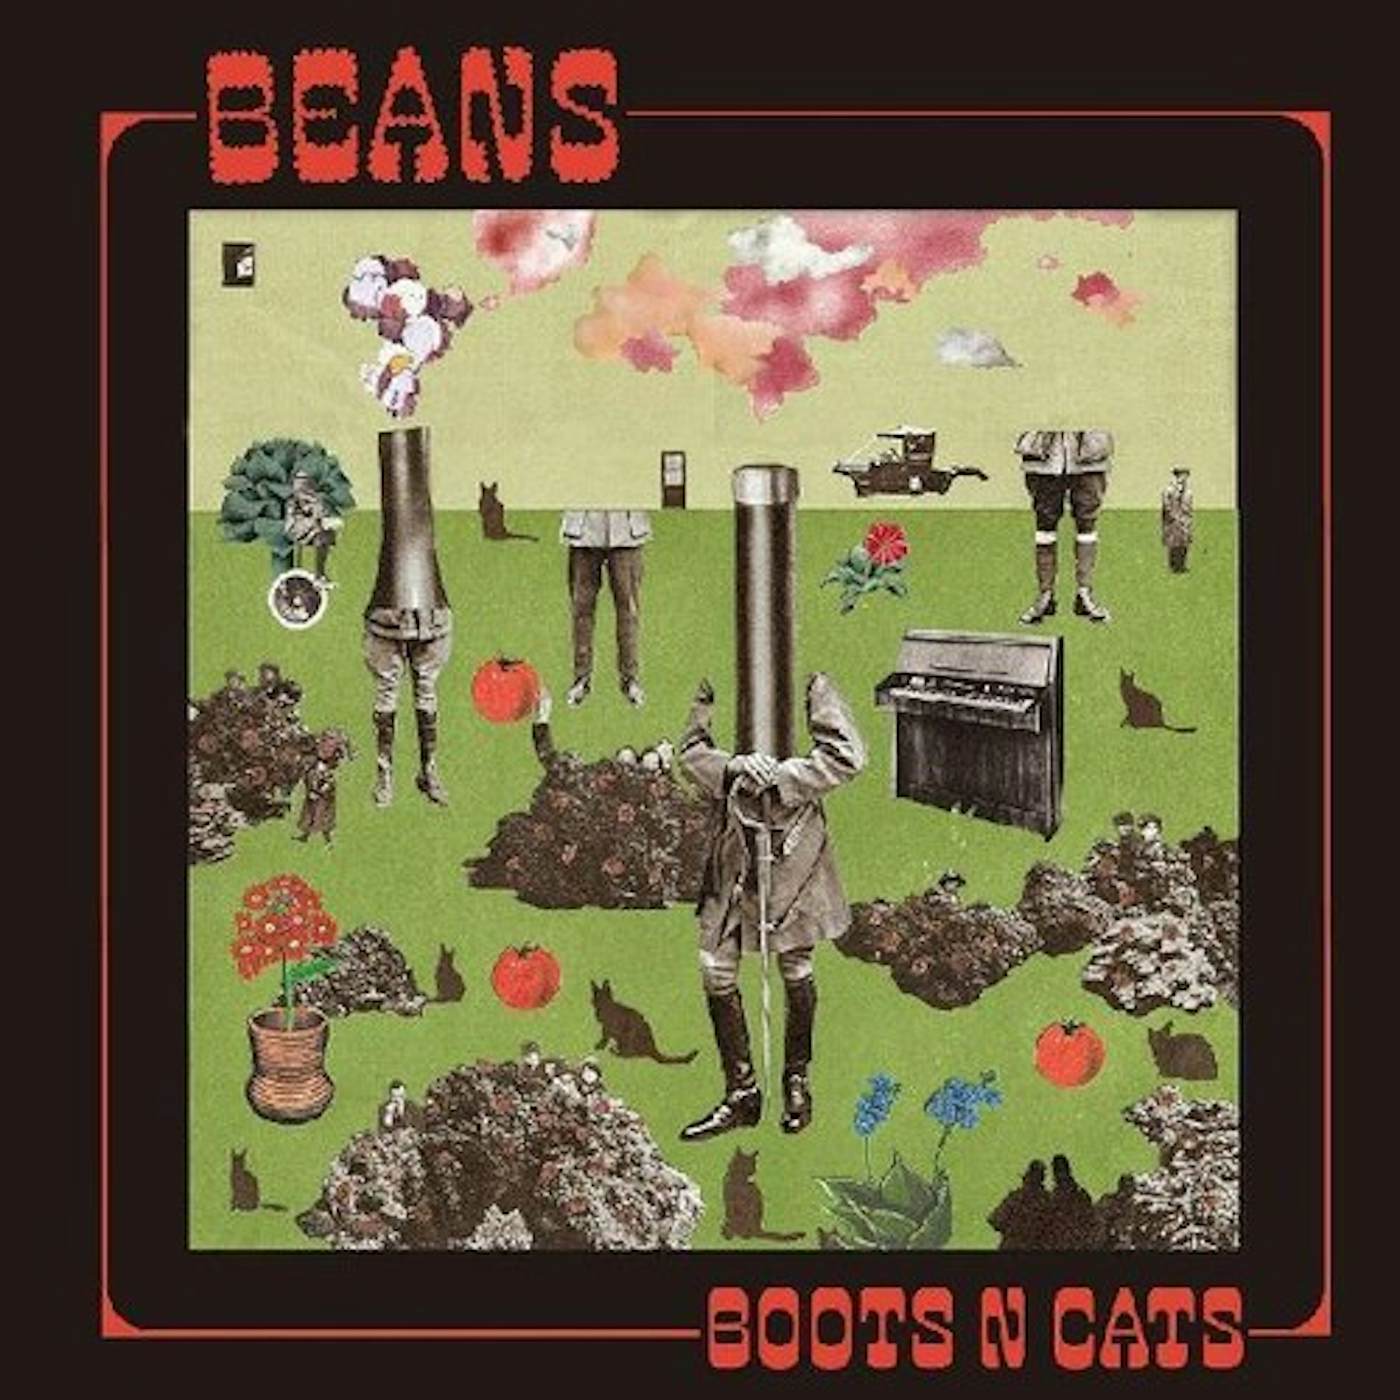 Beans BOOTS N CATS CD